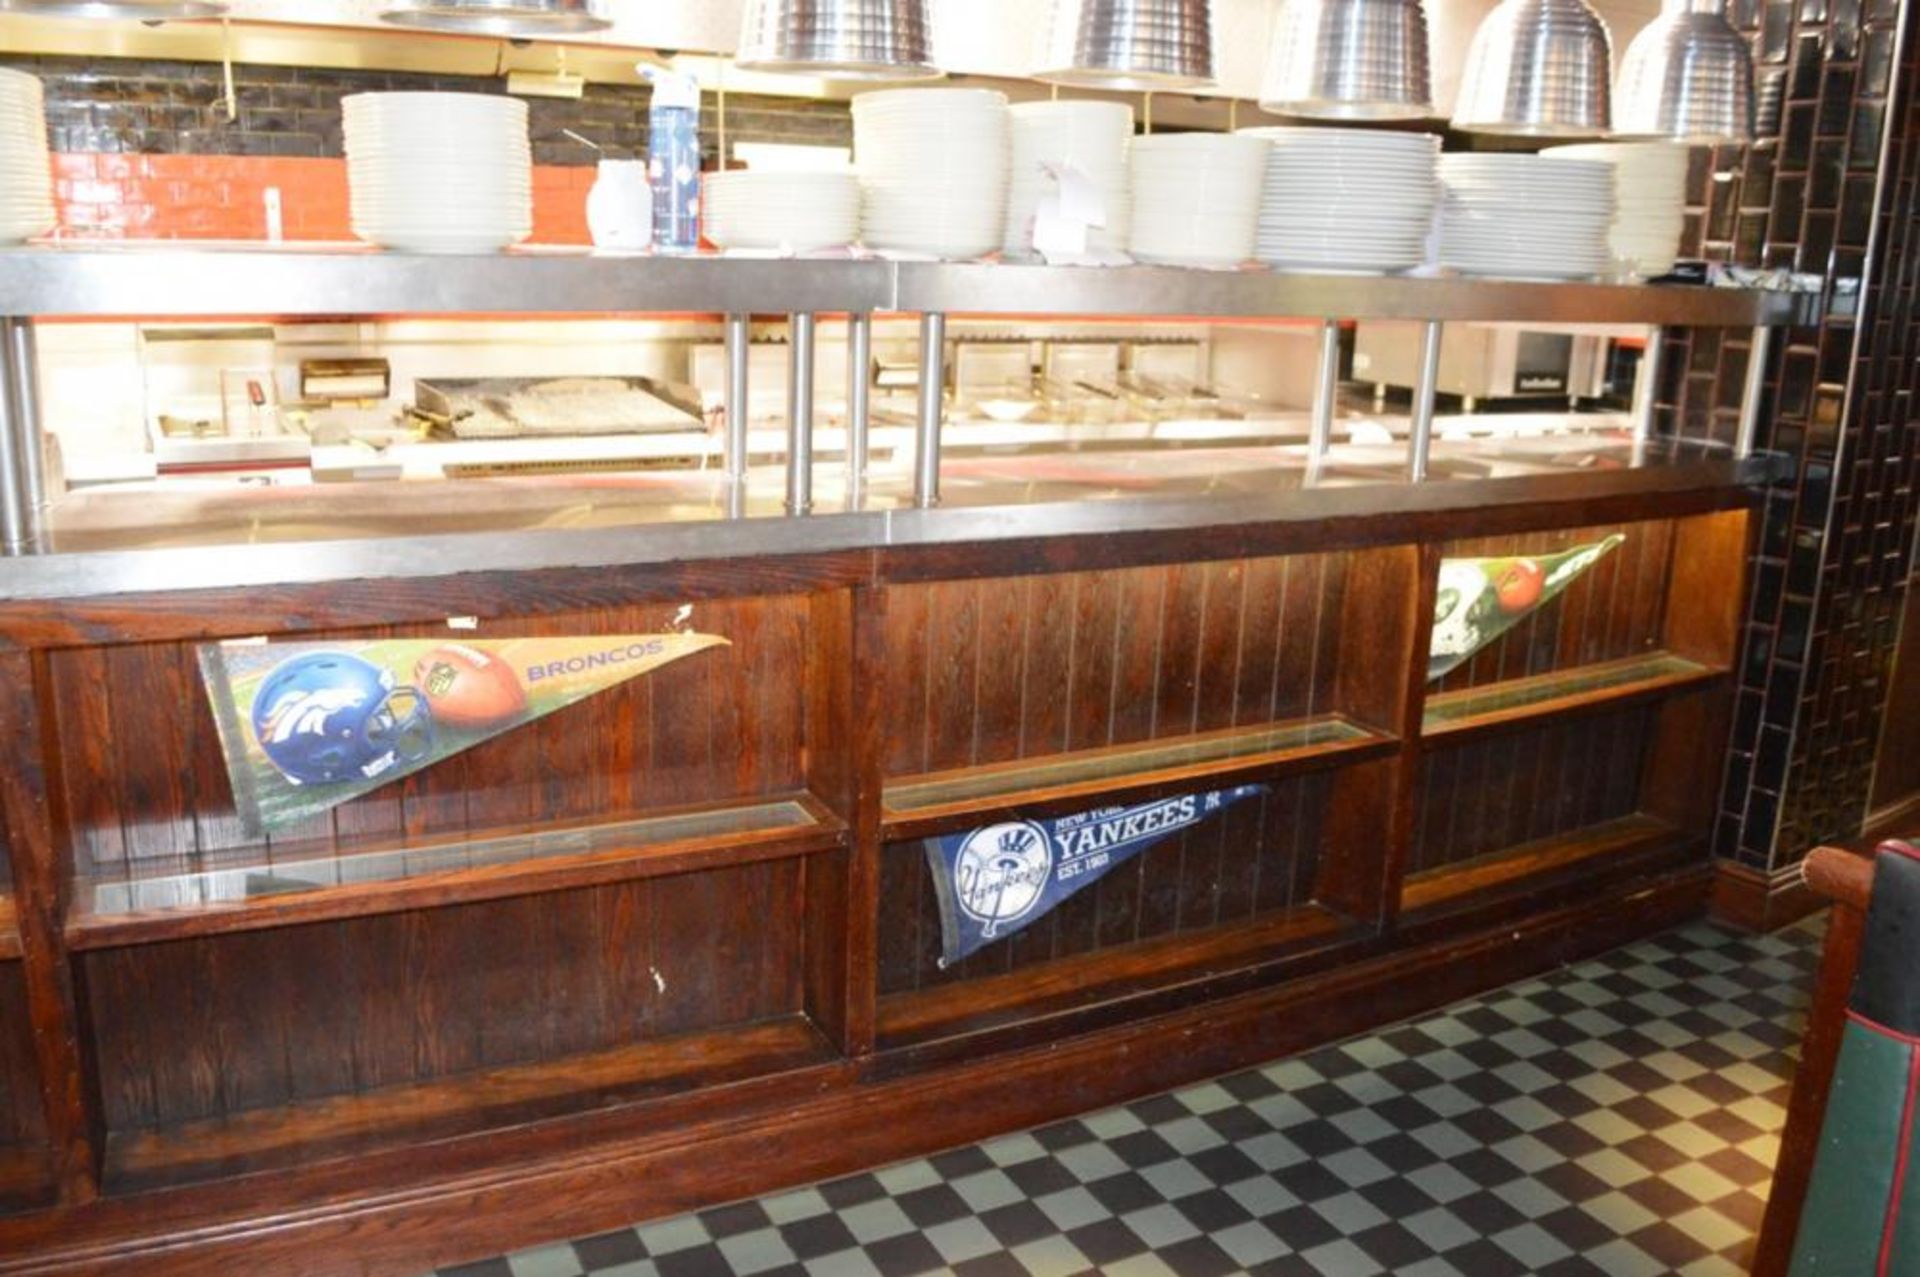 1 x Restaurant Food Collection Gantry Partition With Illuminated Display Shelves and Stainless Steel - Image 7 of 10